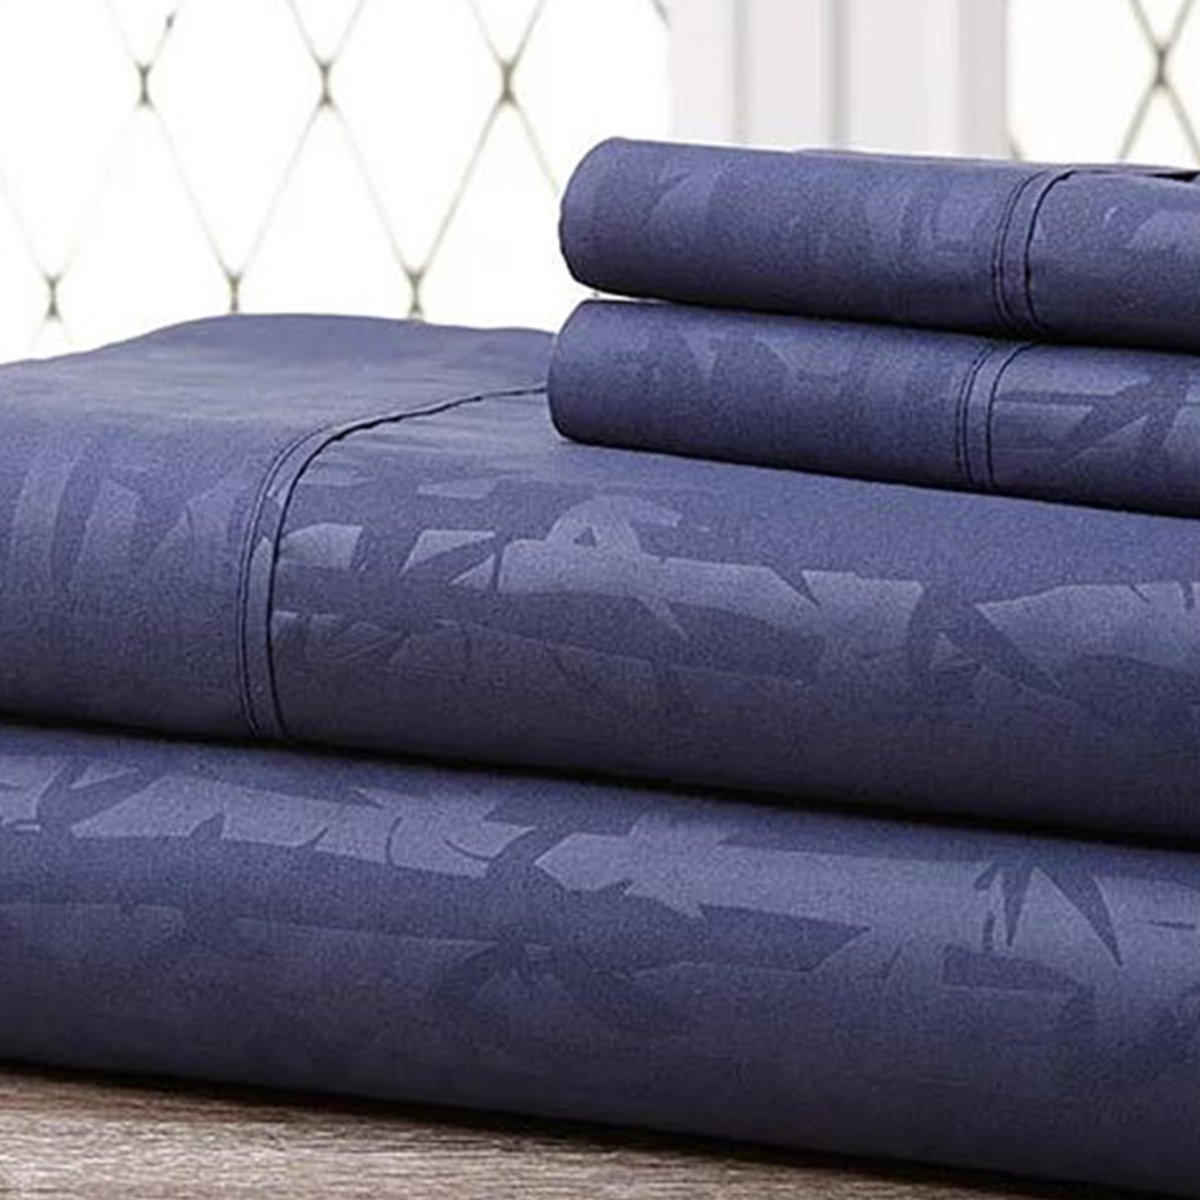 Hny-4pc-eb-nav-k Super-soft 1600 Series Bamboo Embossed Bed Sheet, Navy - King, 4 Piece